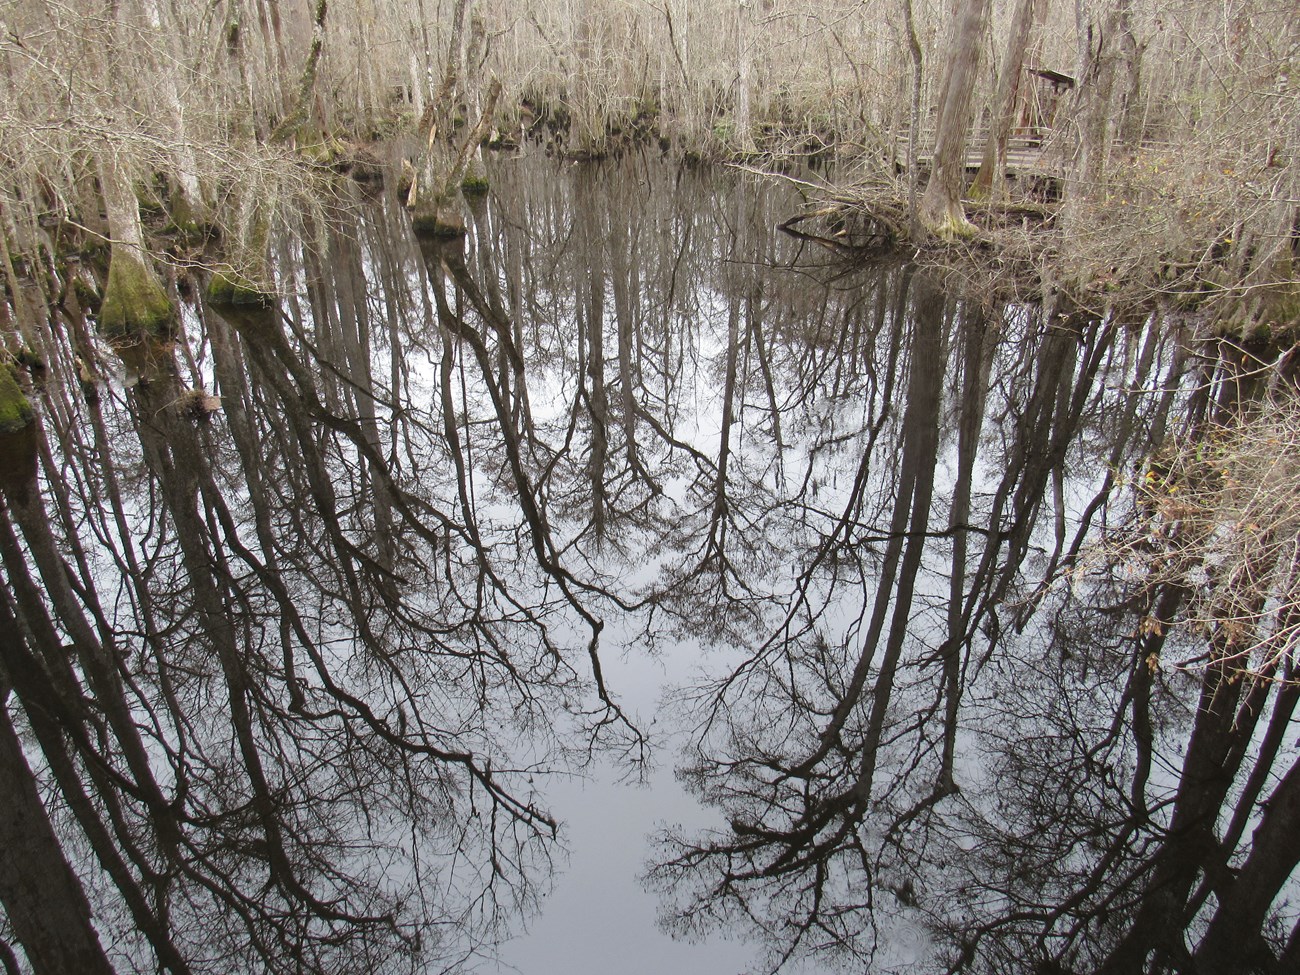 This image captures the water of the swamp. In the reflection of the water are the trunks of dozens of trees.